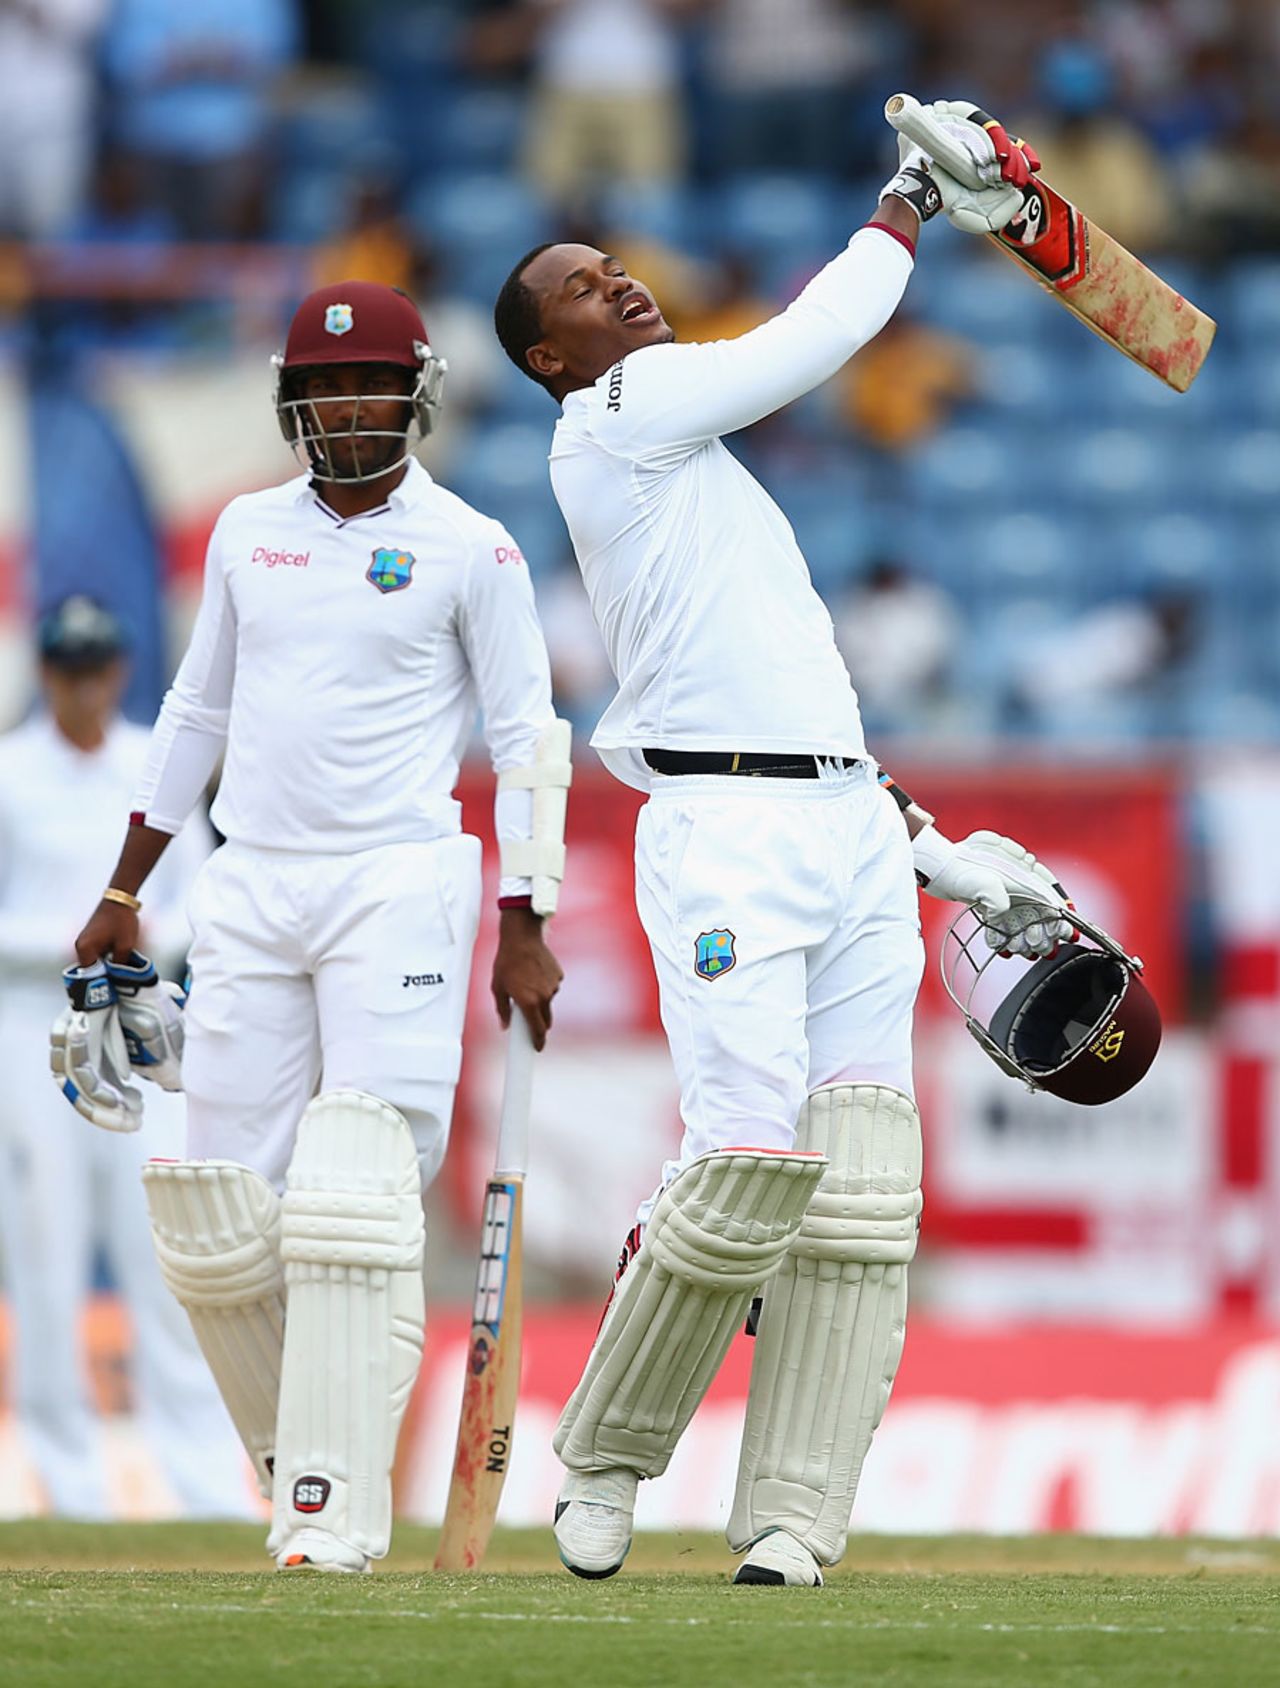 Marlon Samuels eventually reached his seventh Test hundred, West Indies v England, 2nd Test, St George's, 2nd day, April 22, 2015